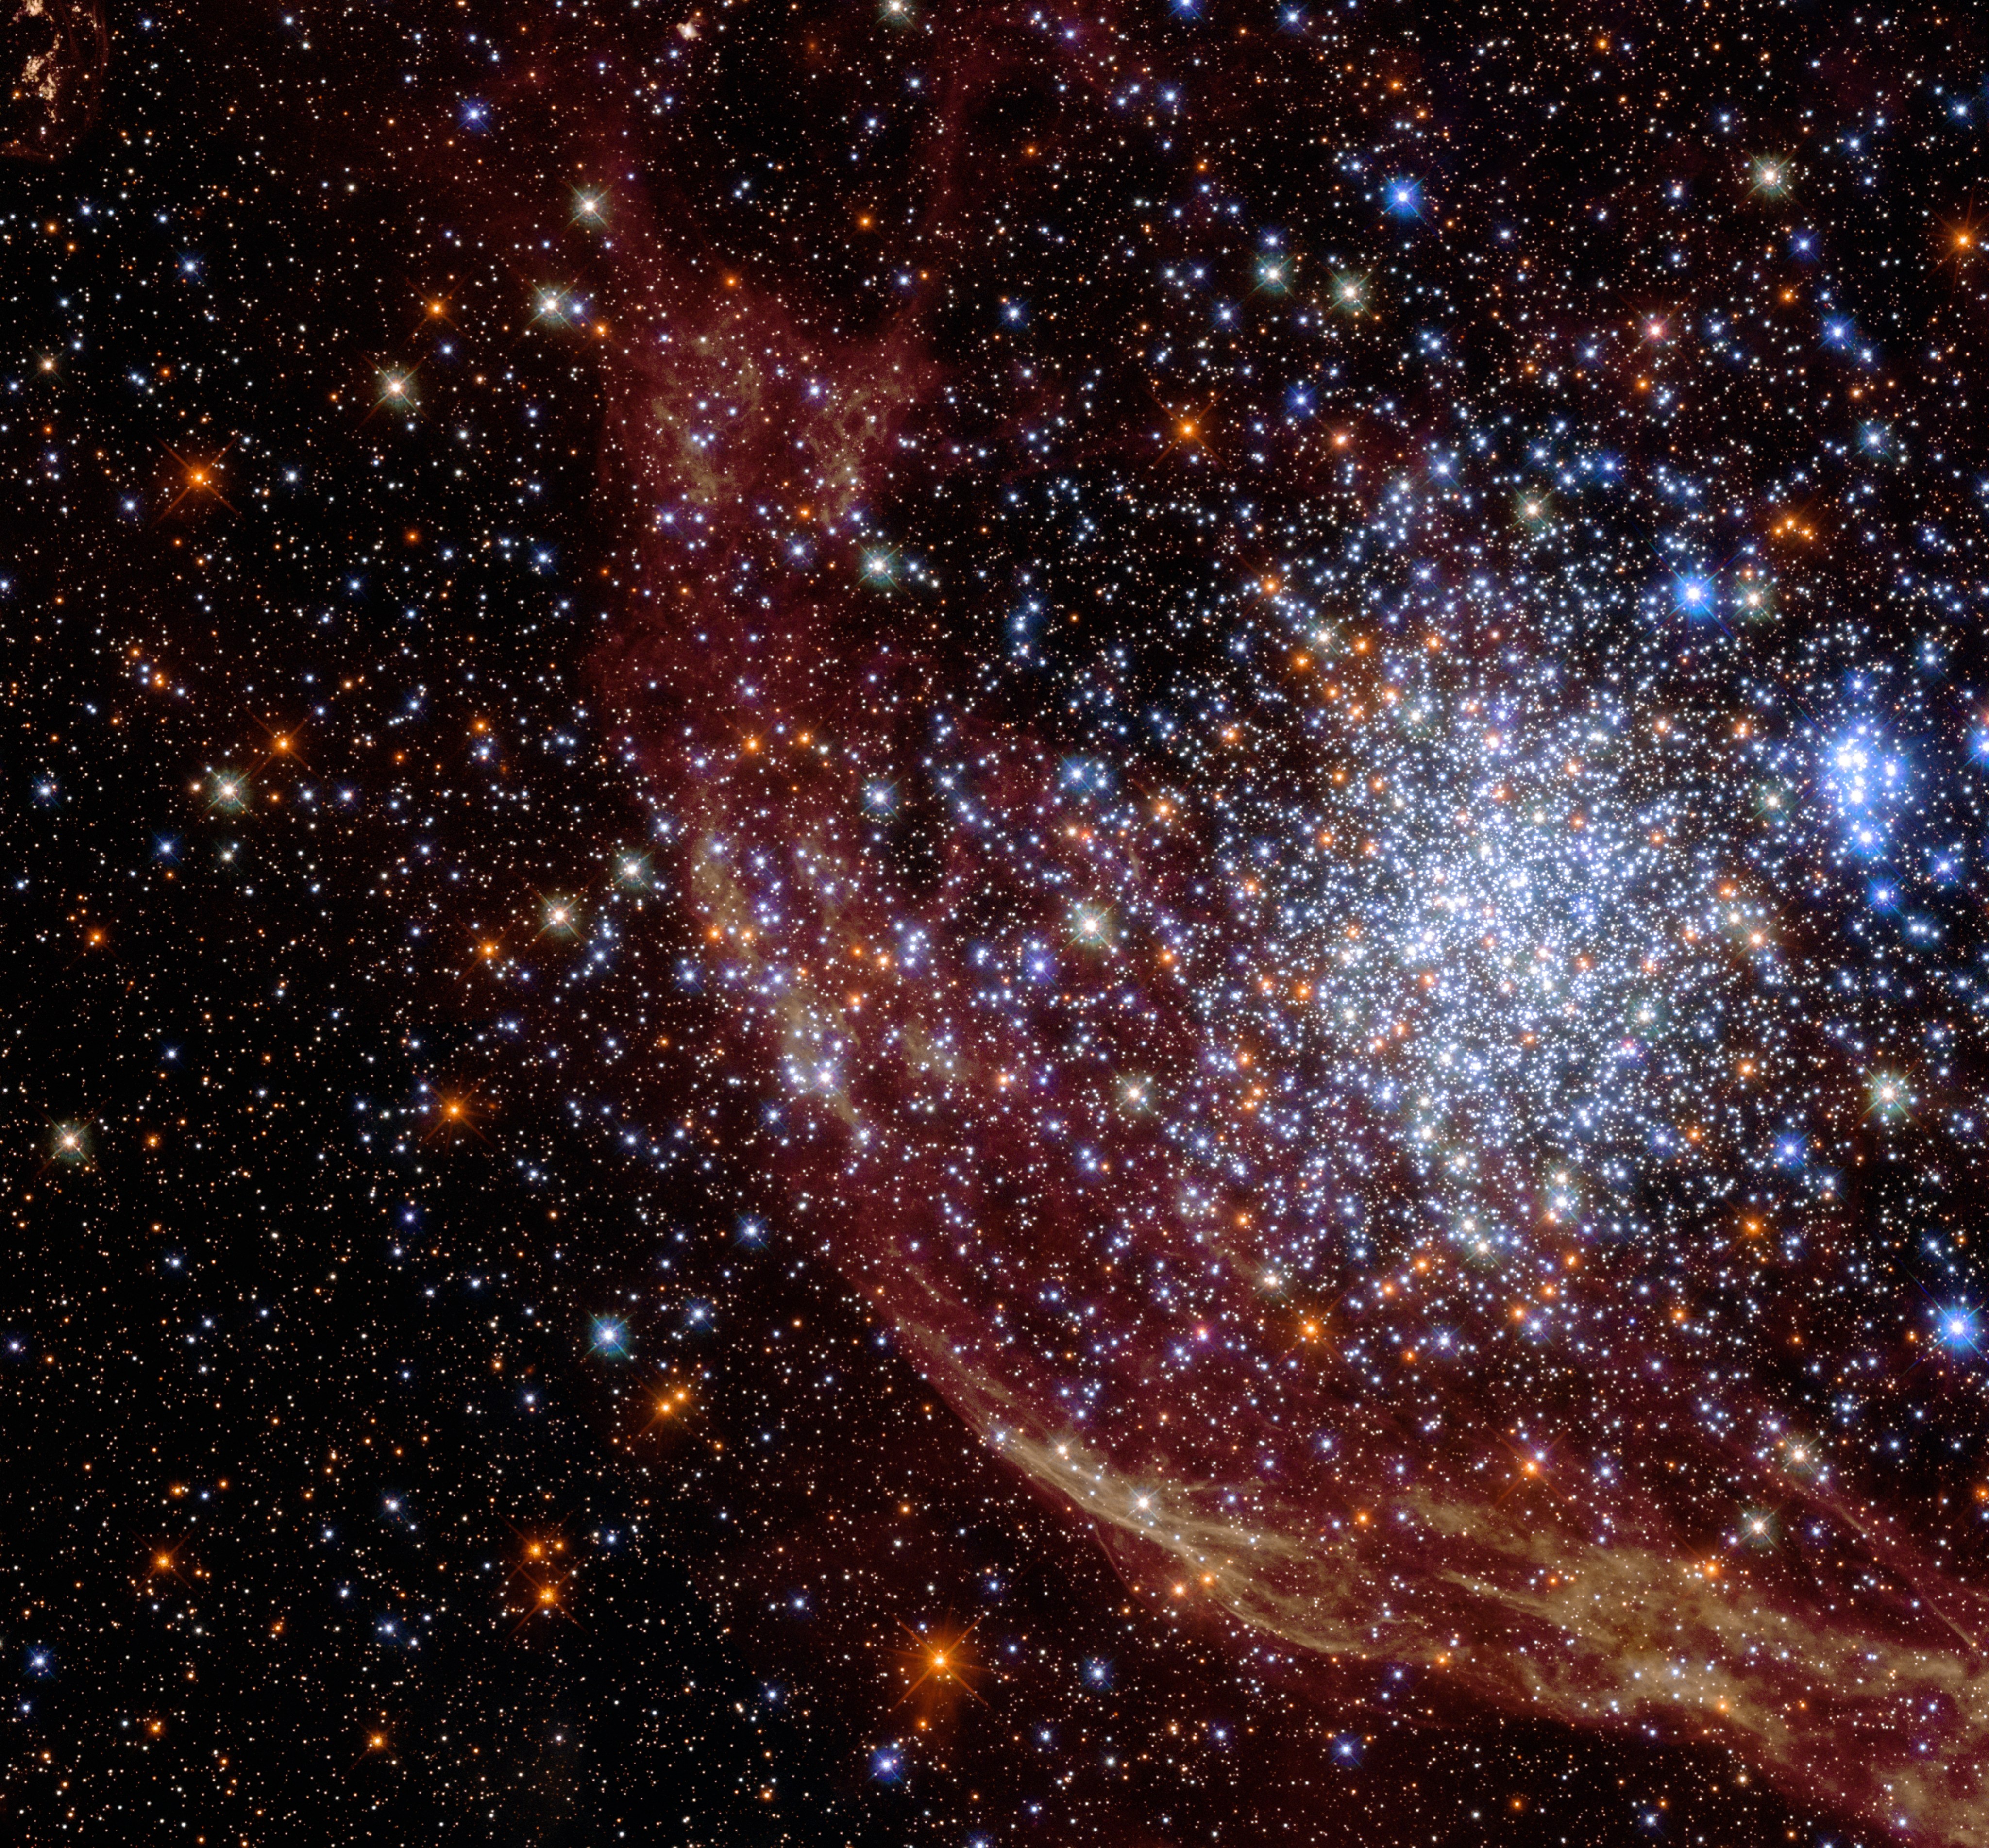 Thousands of red, white, yellow, and blue stars in a star cluster that is in front of a reddish orange cloud of gas and dust.